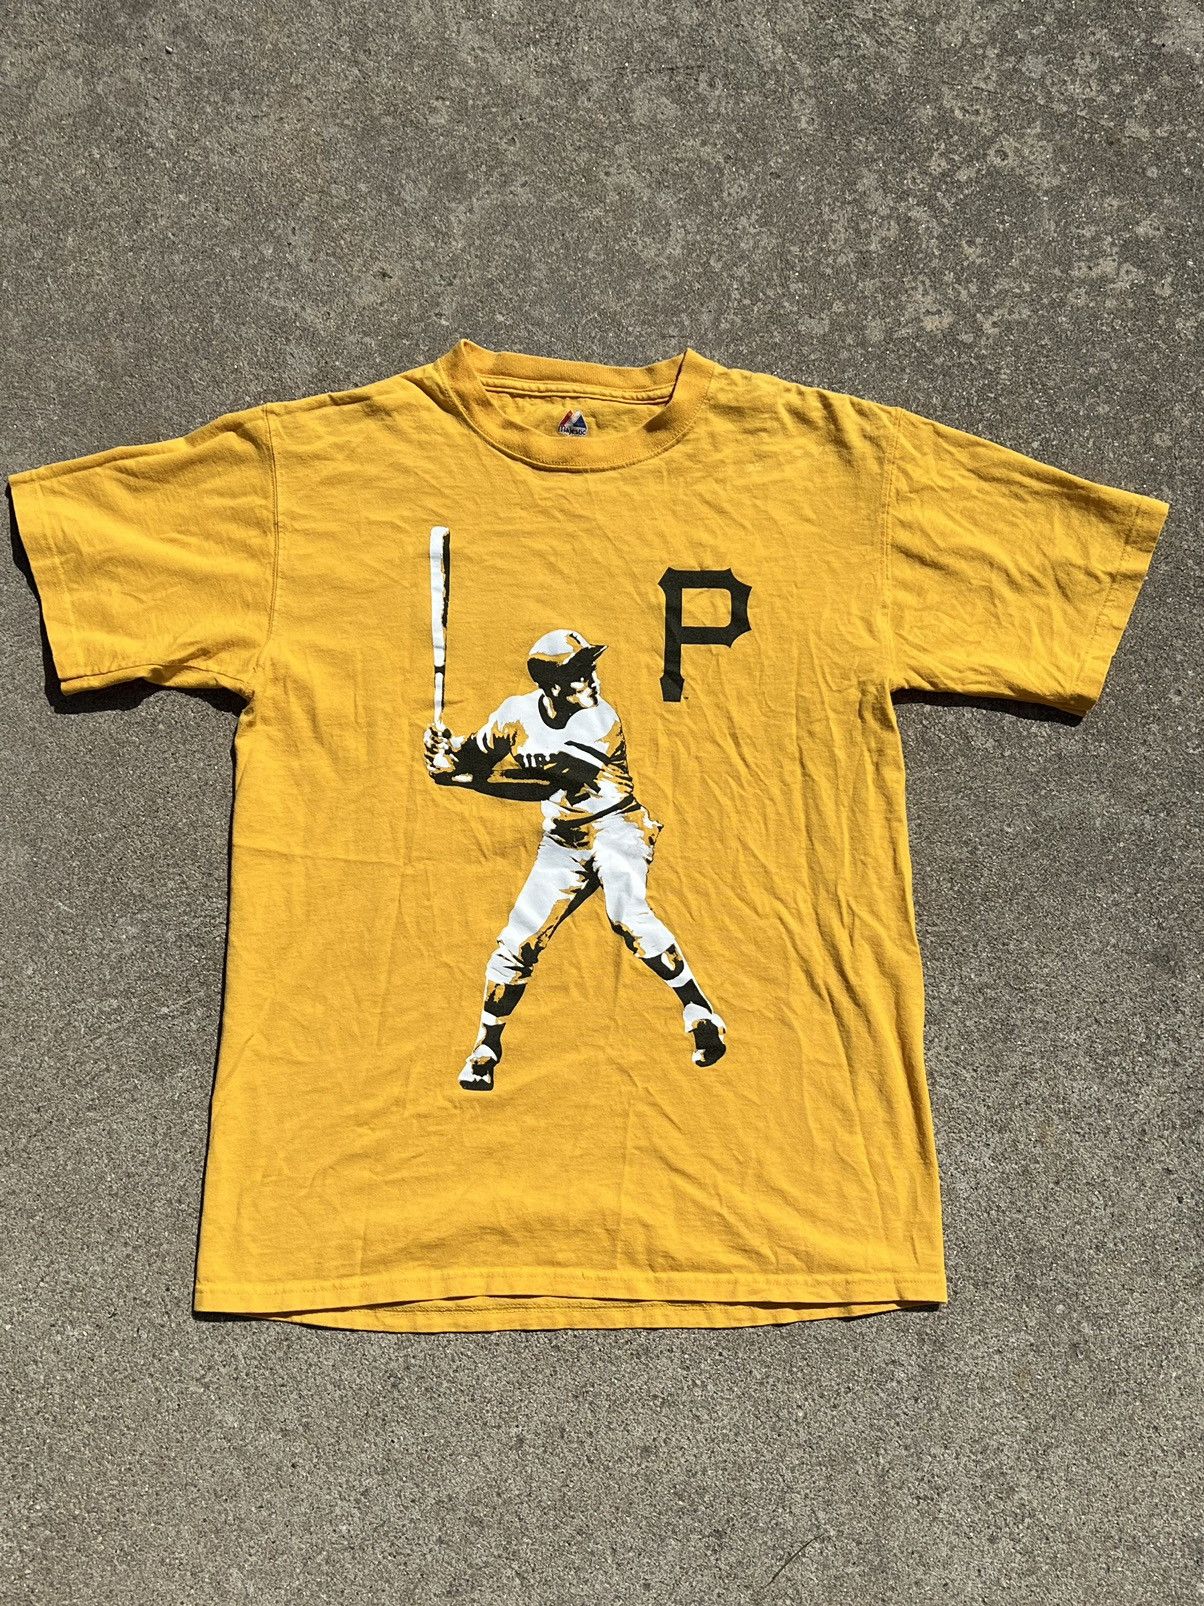 Majestic Roberto Clemente MLB Jerseys for sale